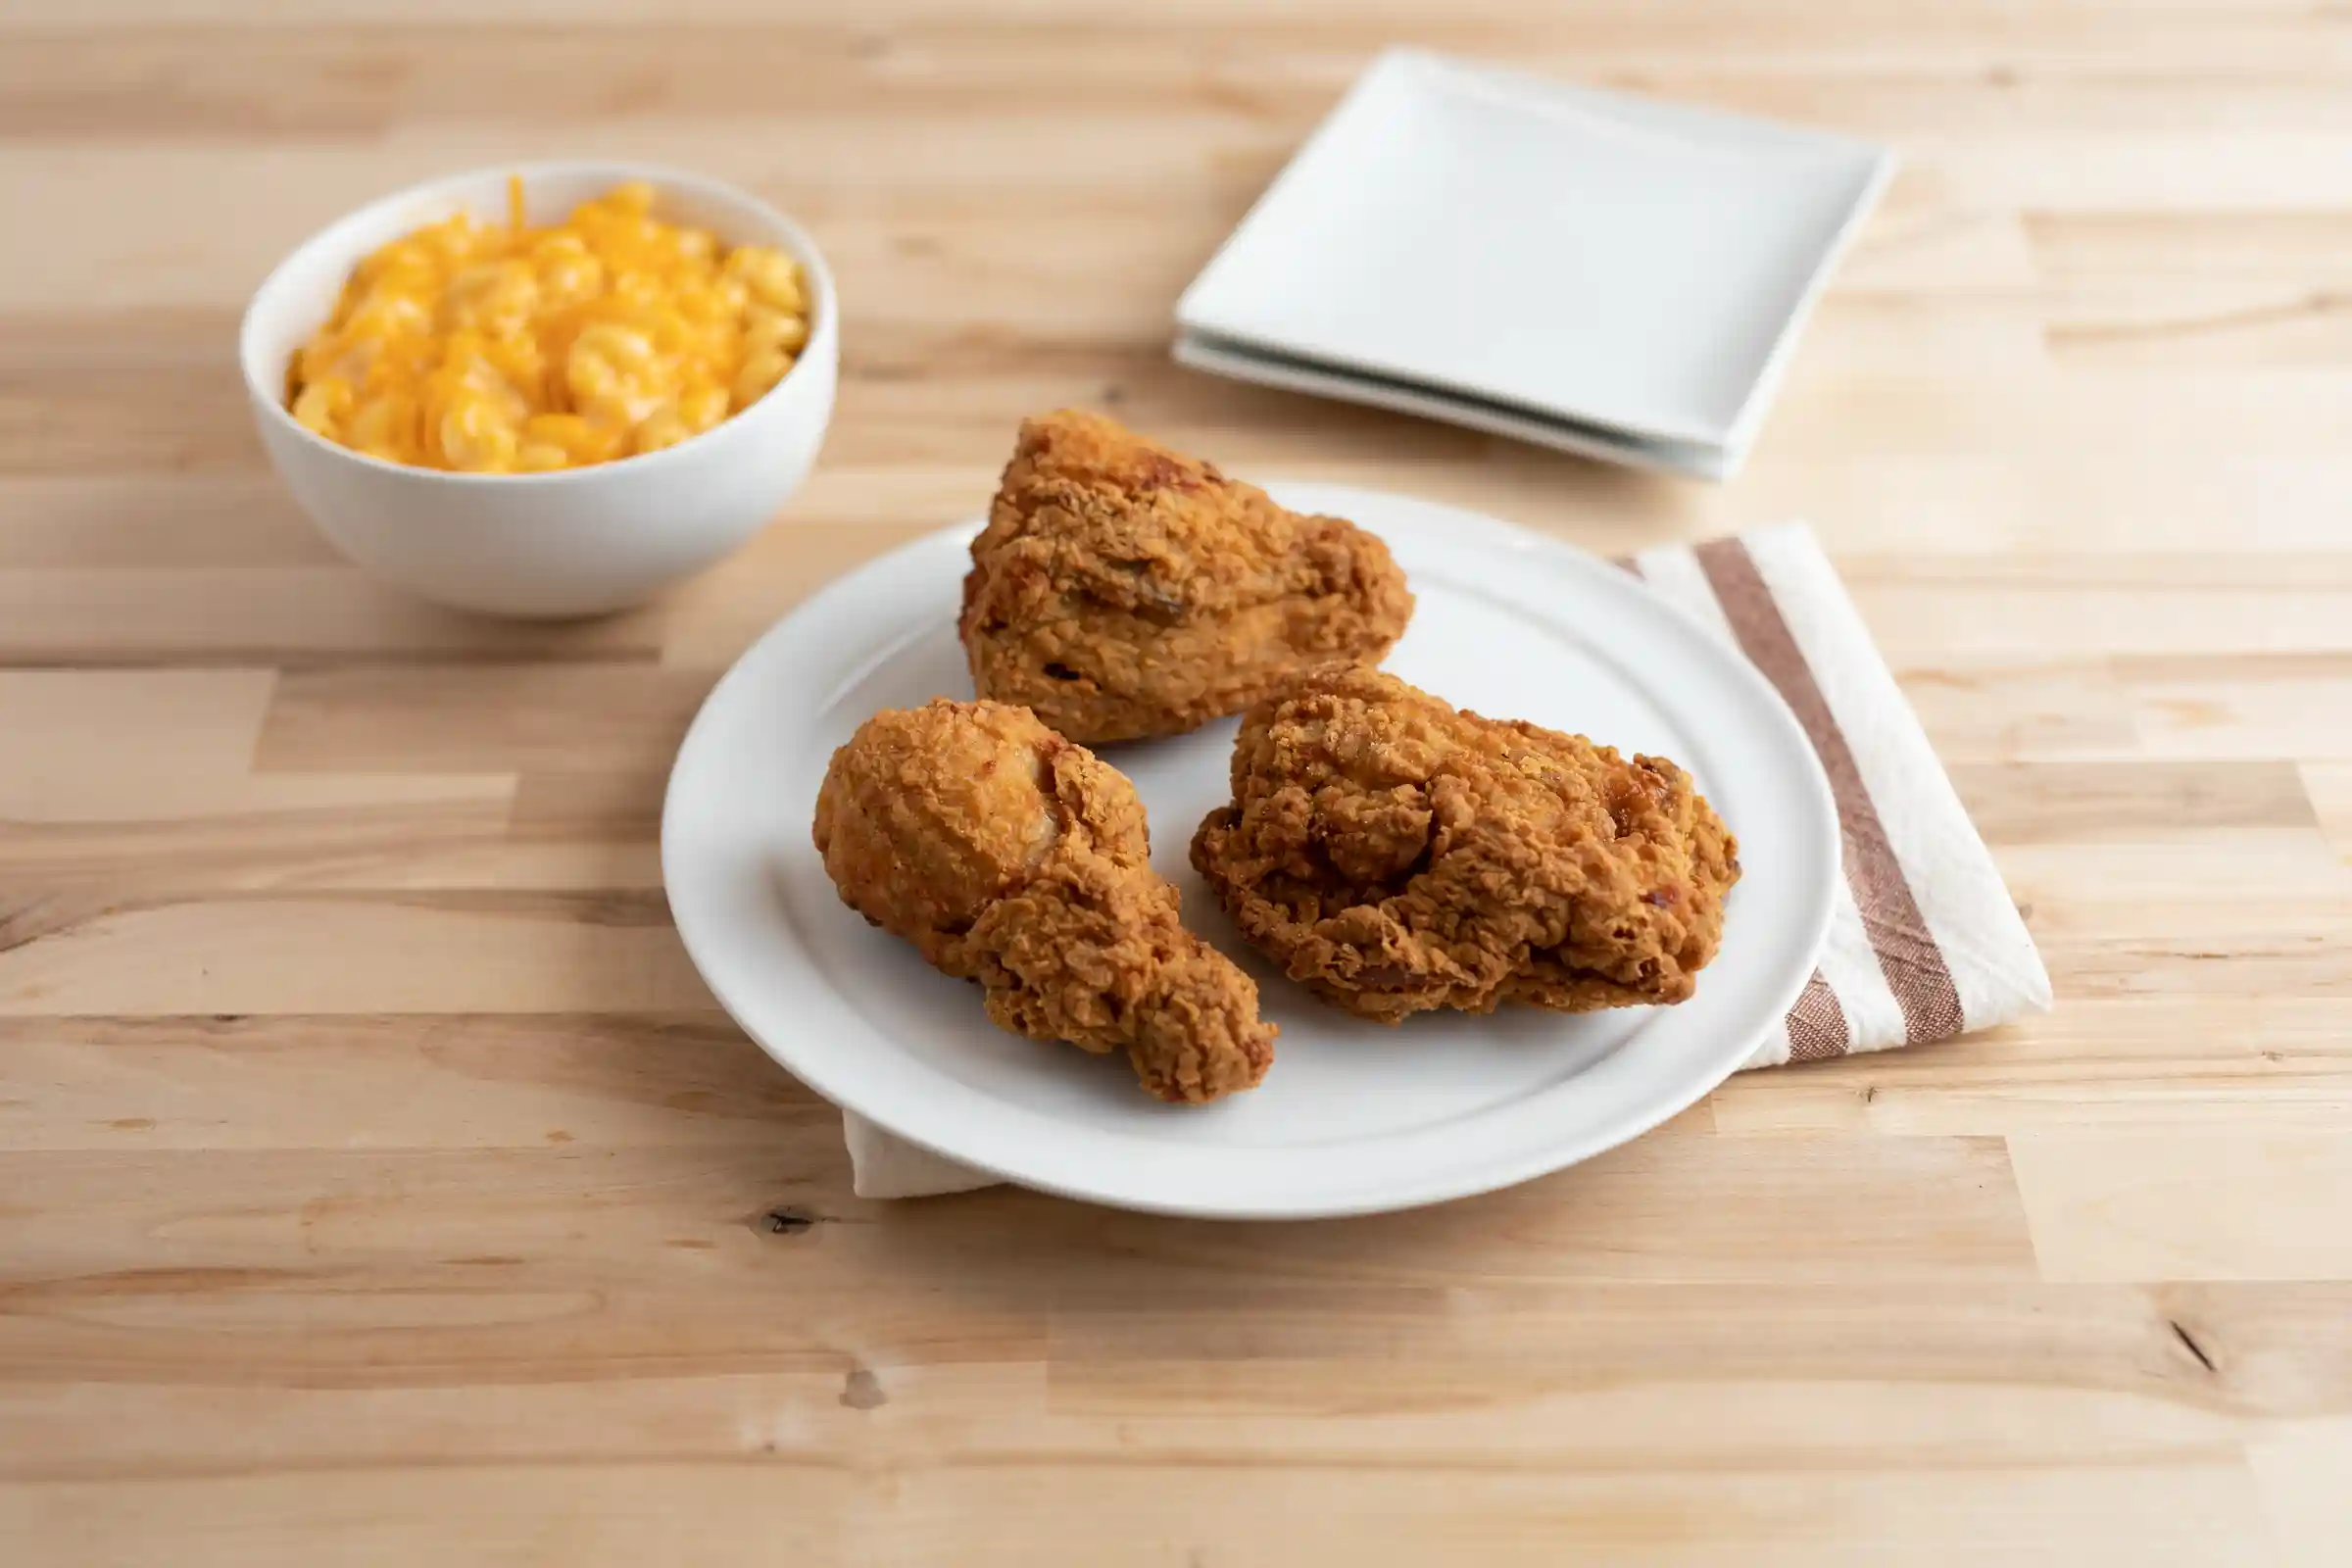 Tyson® Fully Cooked Breaded Assorted Chicken Pieces https://images.salsify.com/image/upload/s--PgfuM2k---/q_25/a3f3mfclskashla51sog.webp